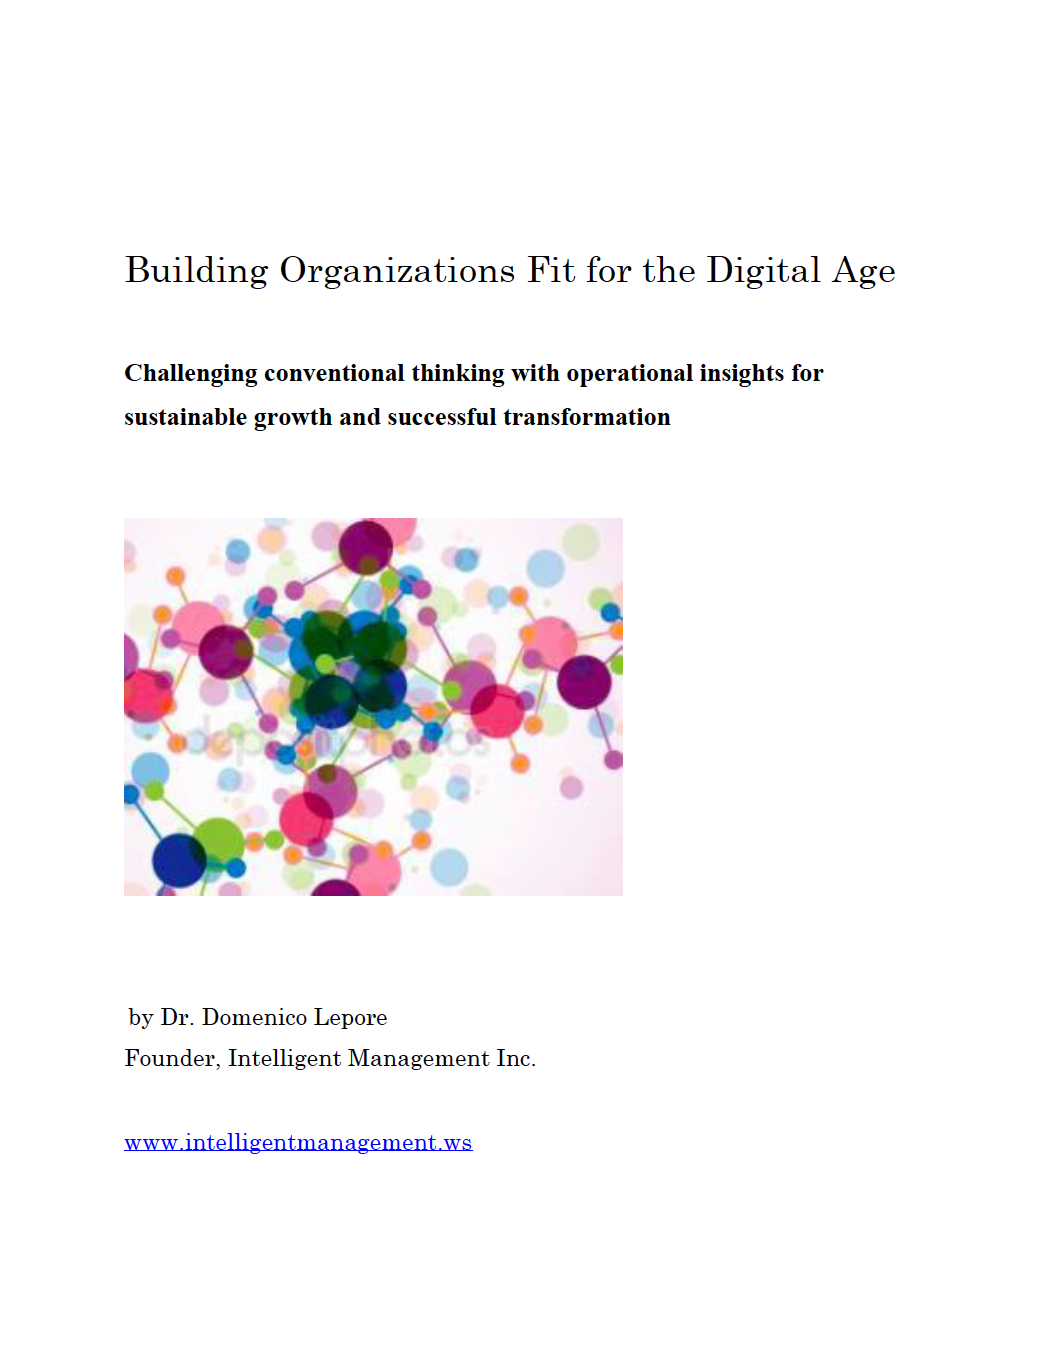 Download our eBOOK 'Building Organizations Fit for the Digital Age'